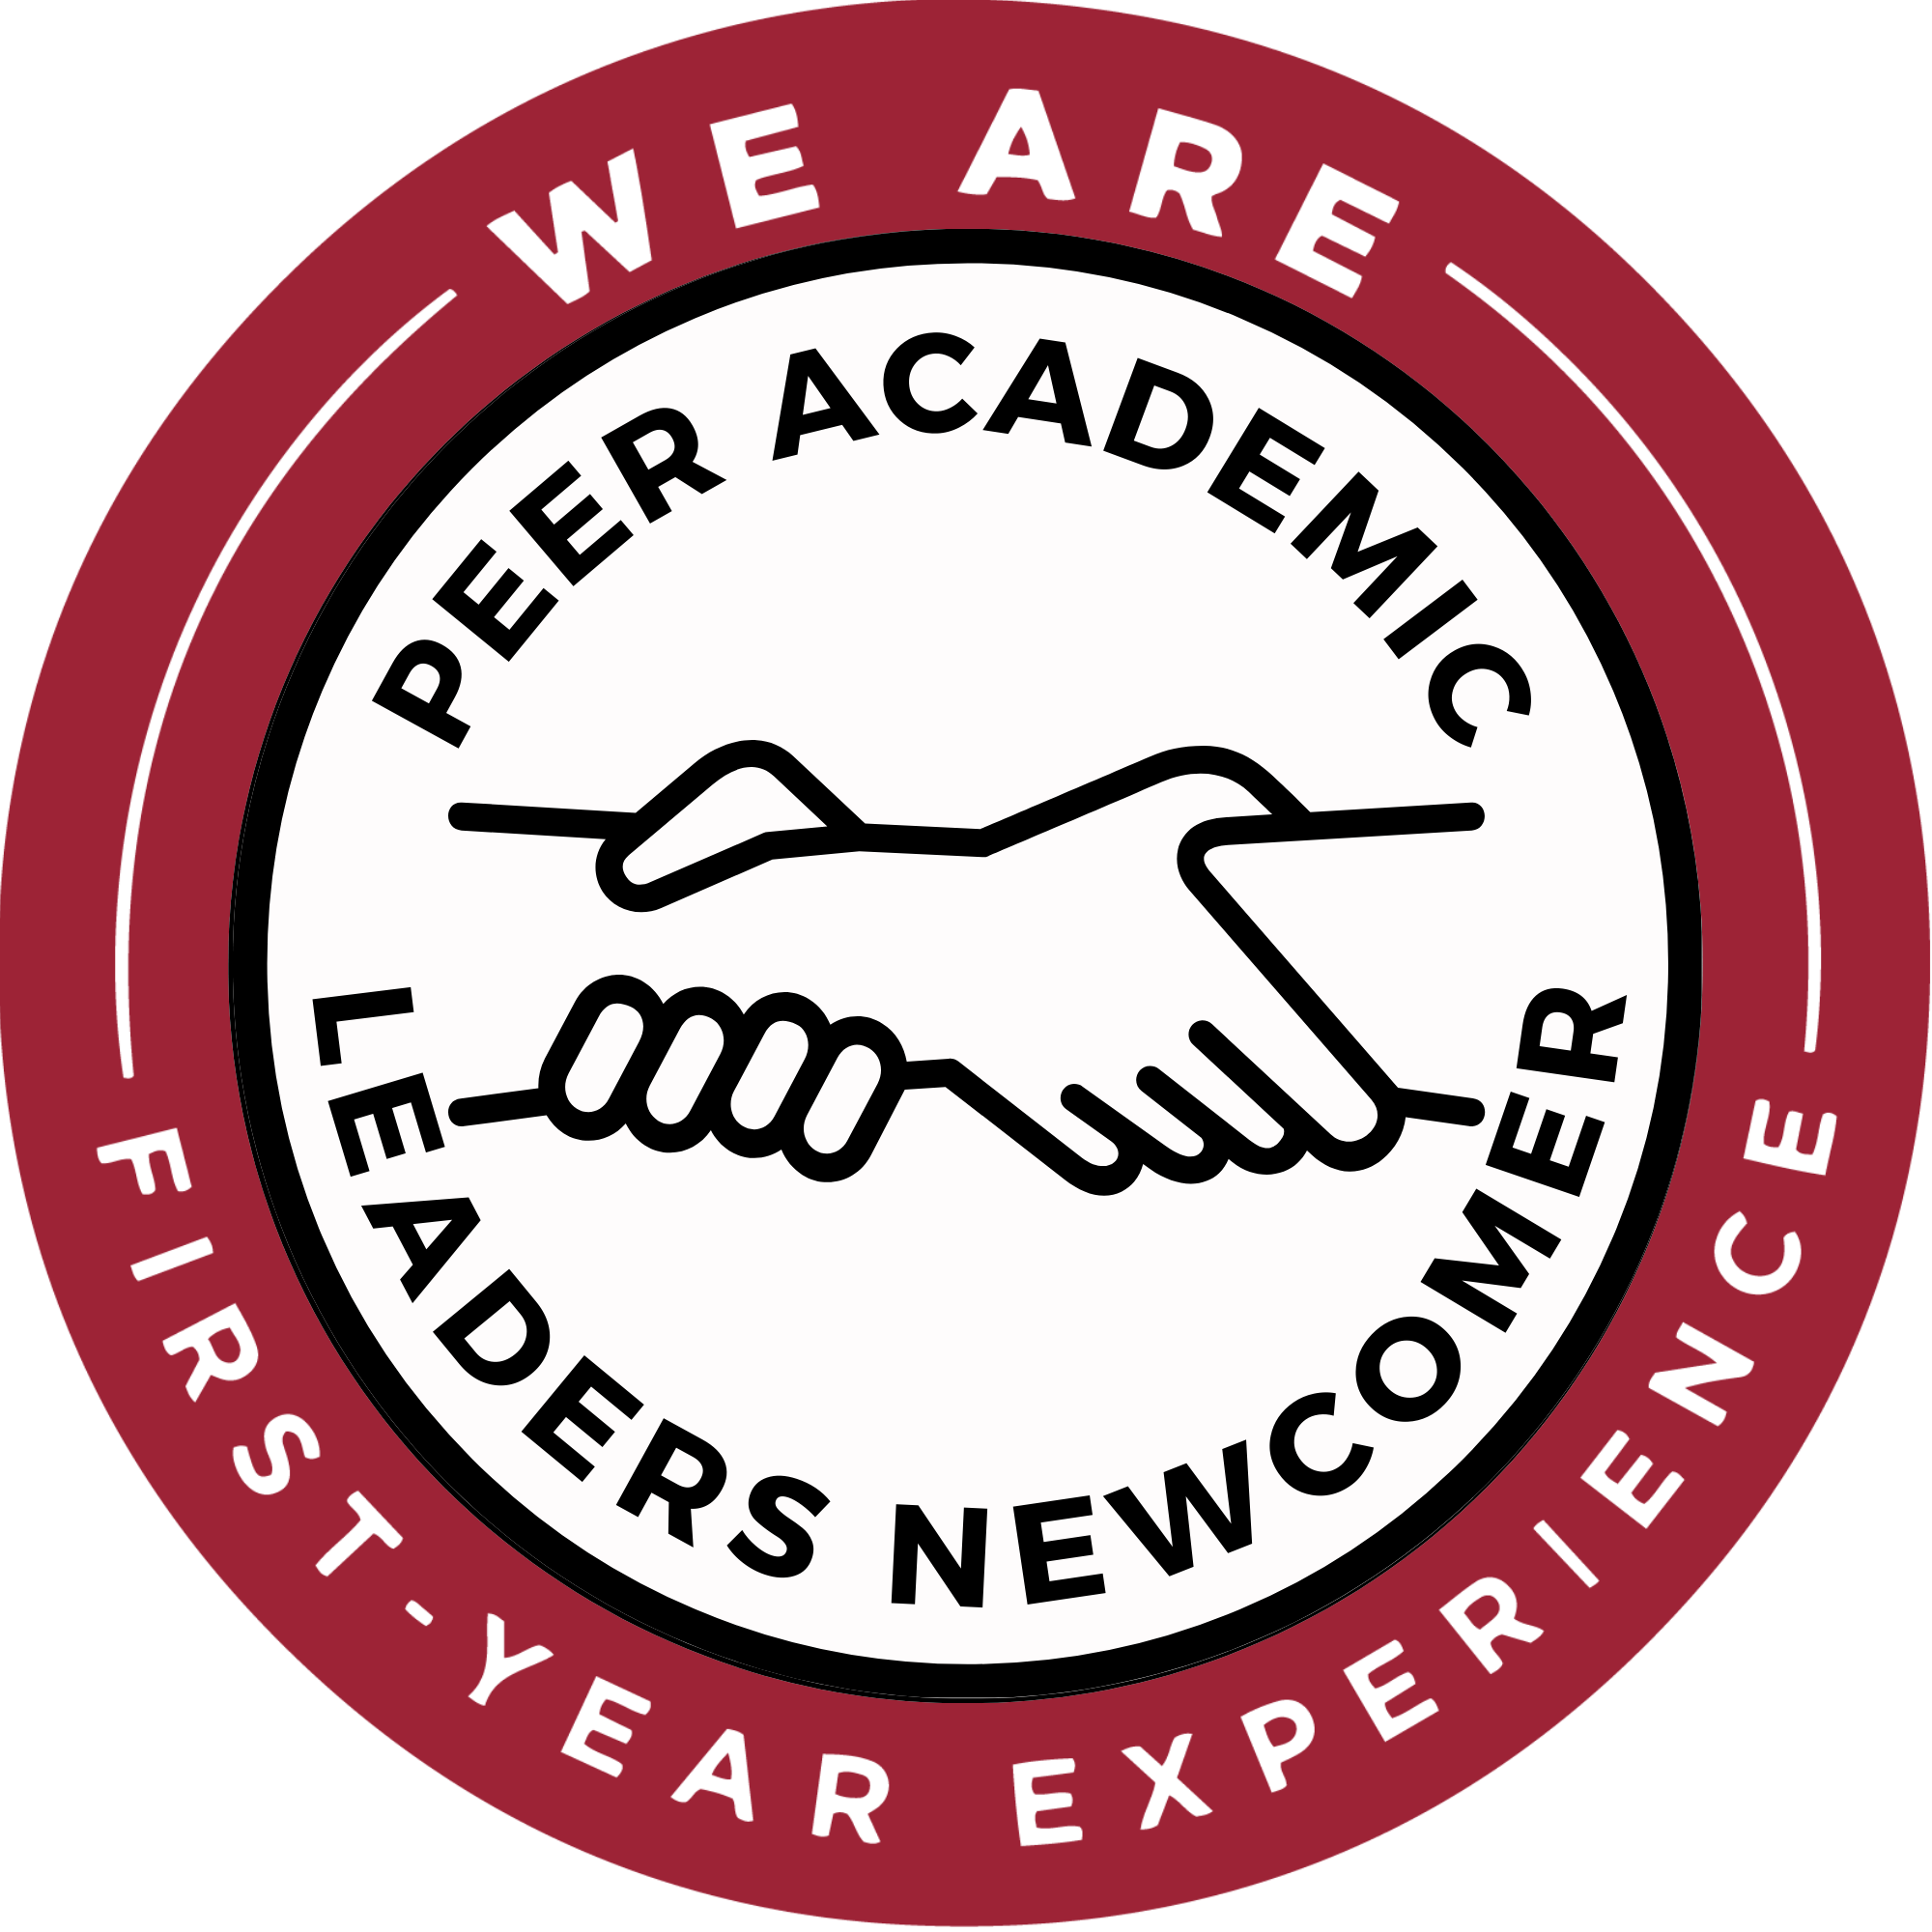 round logo that says peer academic leaders newcomer